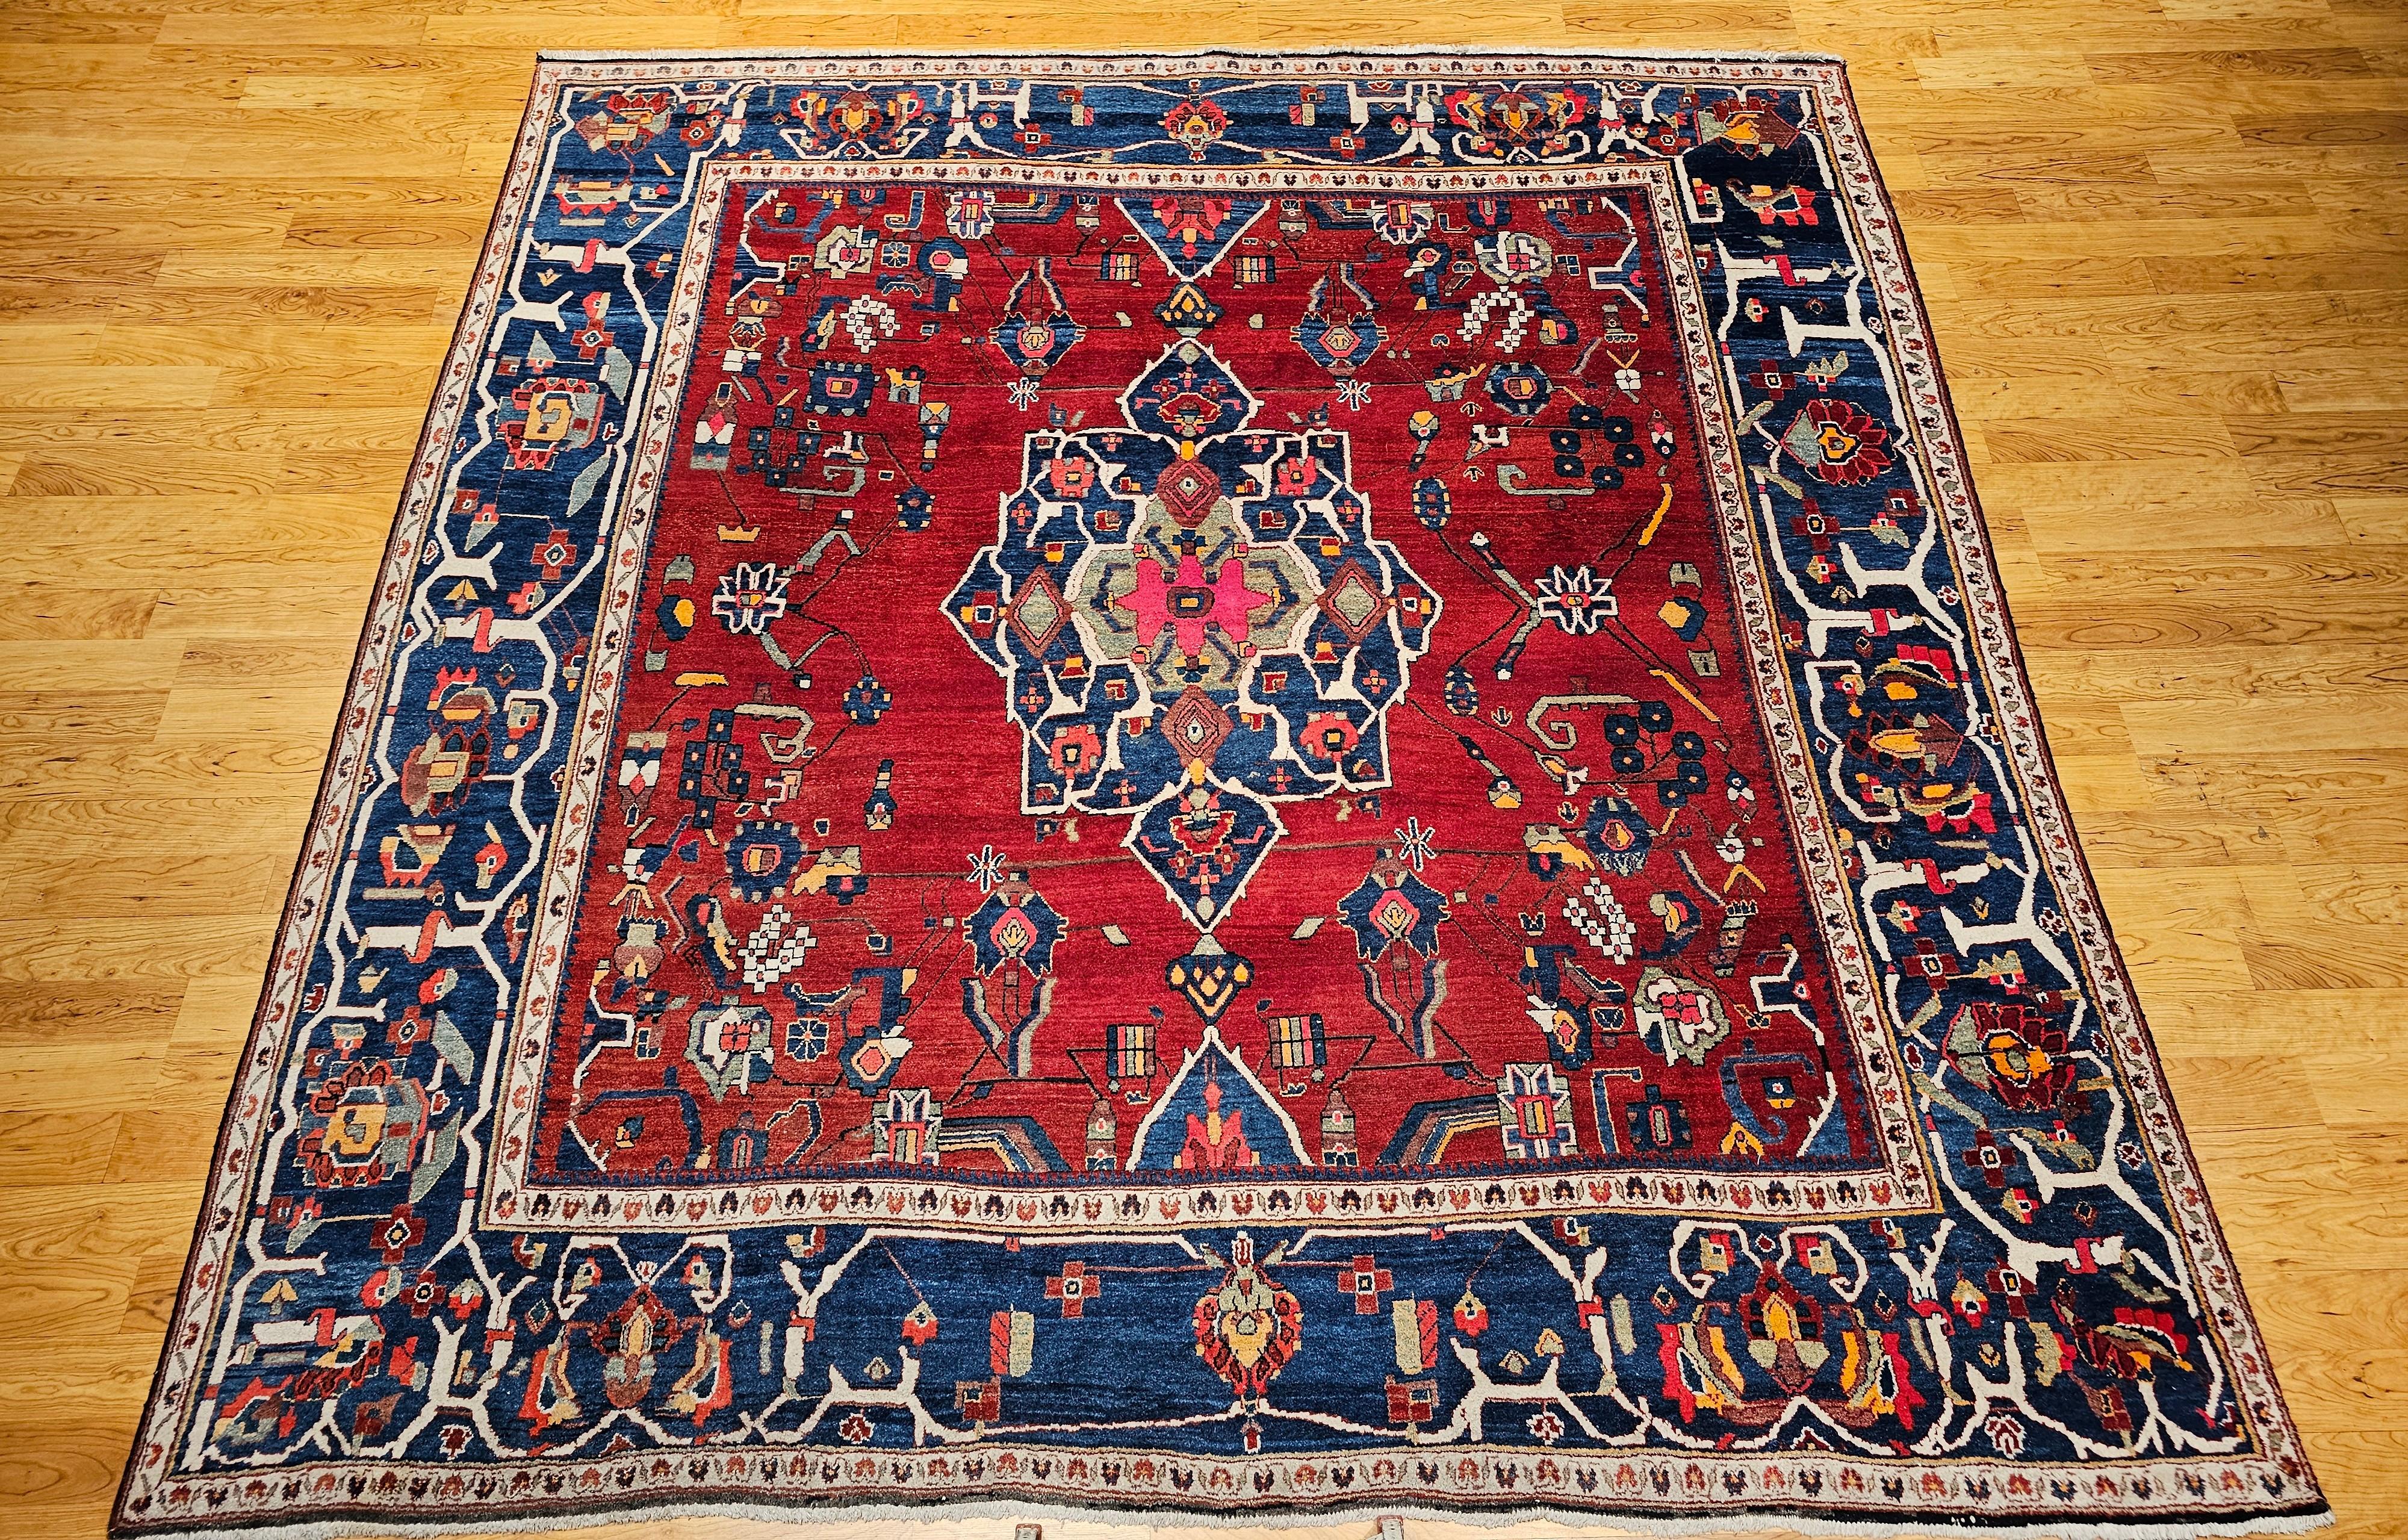 Very rare room size square Persian Hamadan from the mid 1900s in beautiful bright and cheerful colors.  The field color is a brilliant red with the border and the central medallion in abrash French blue.  This wonderful village weaving example has